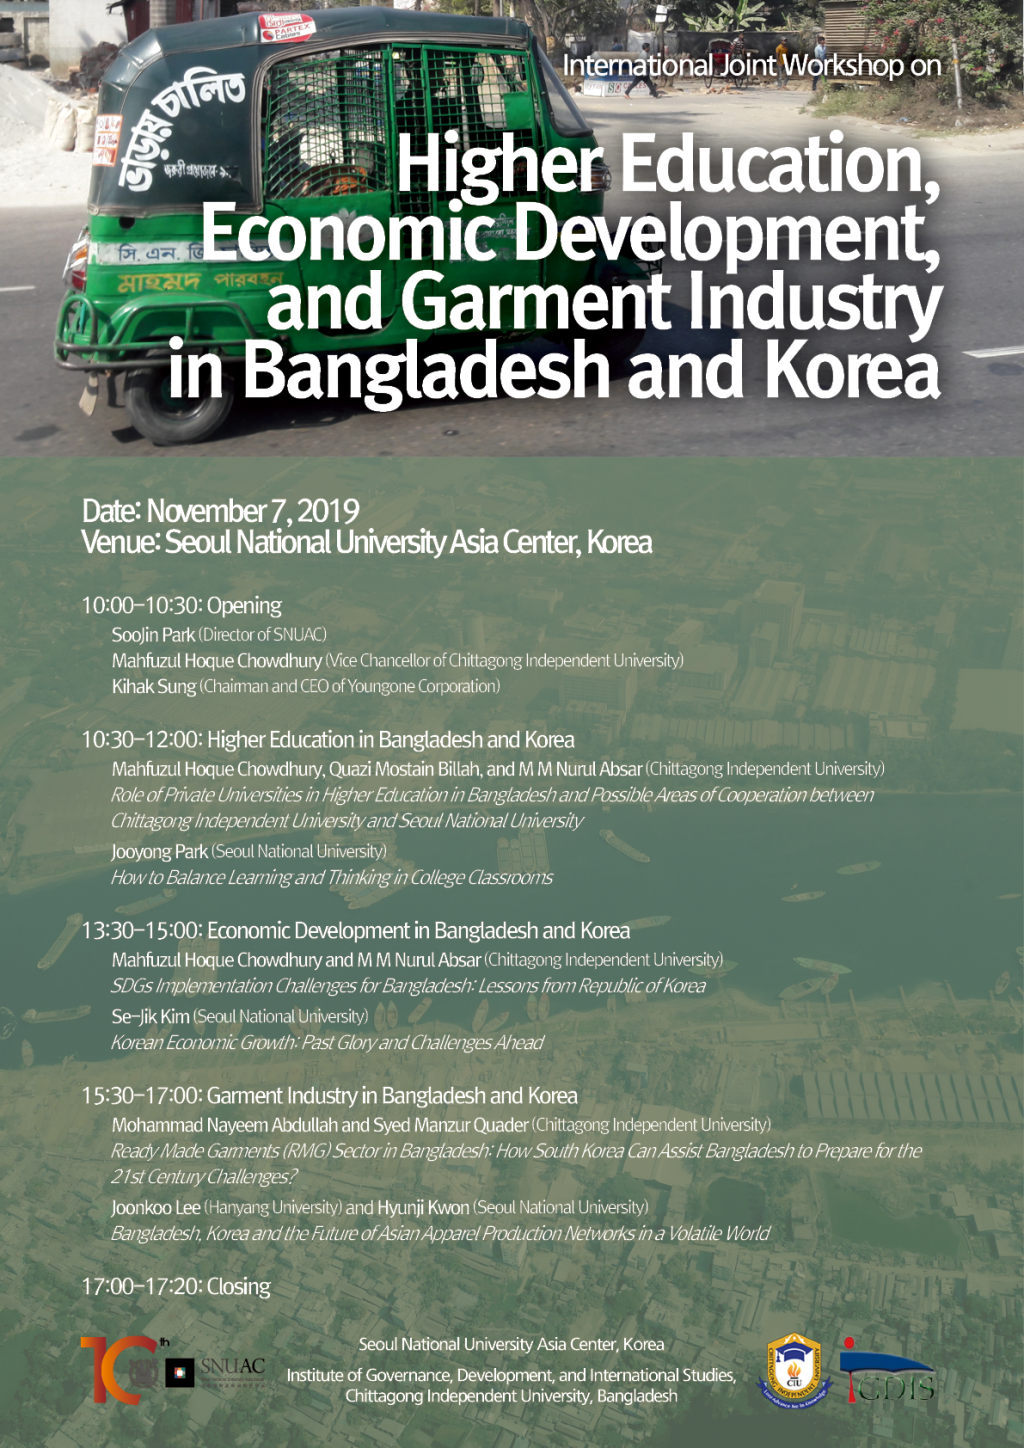 Higher Education, Economic Development, and Garment Industry in Bangladesh and Korea